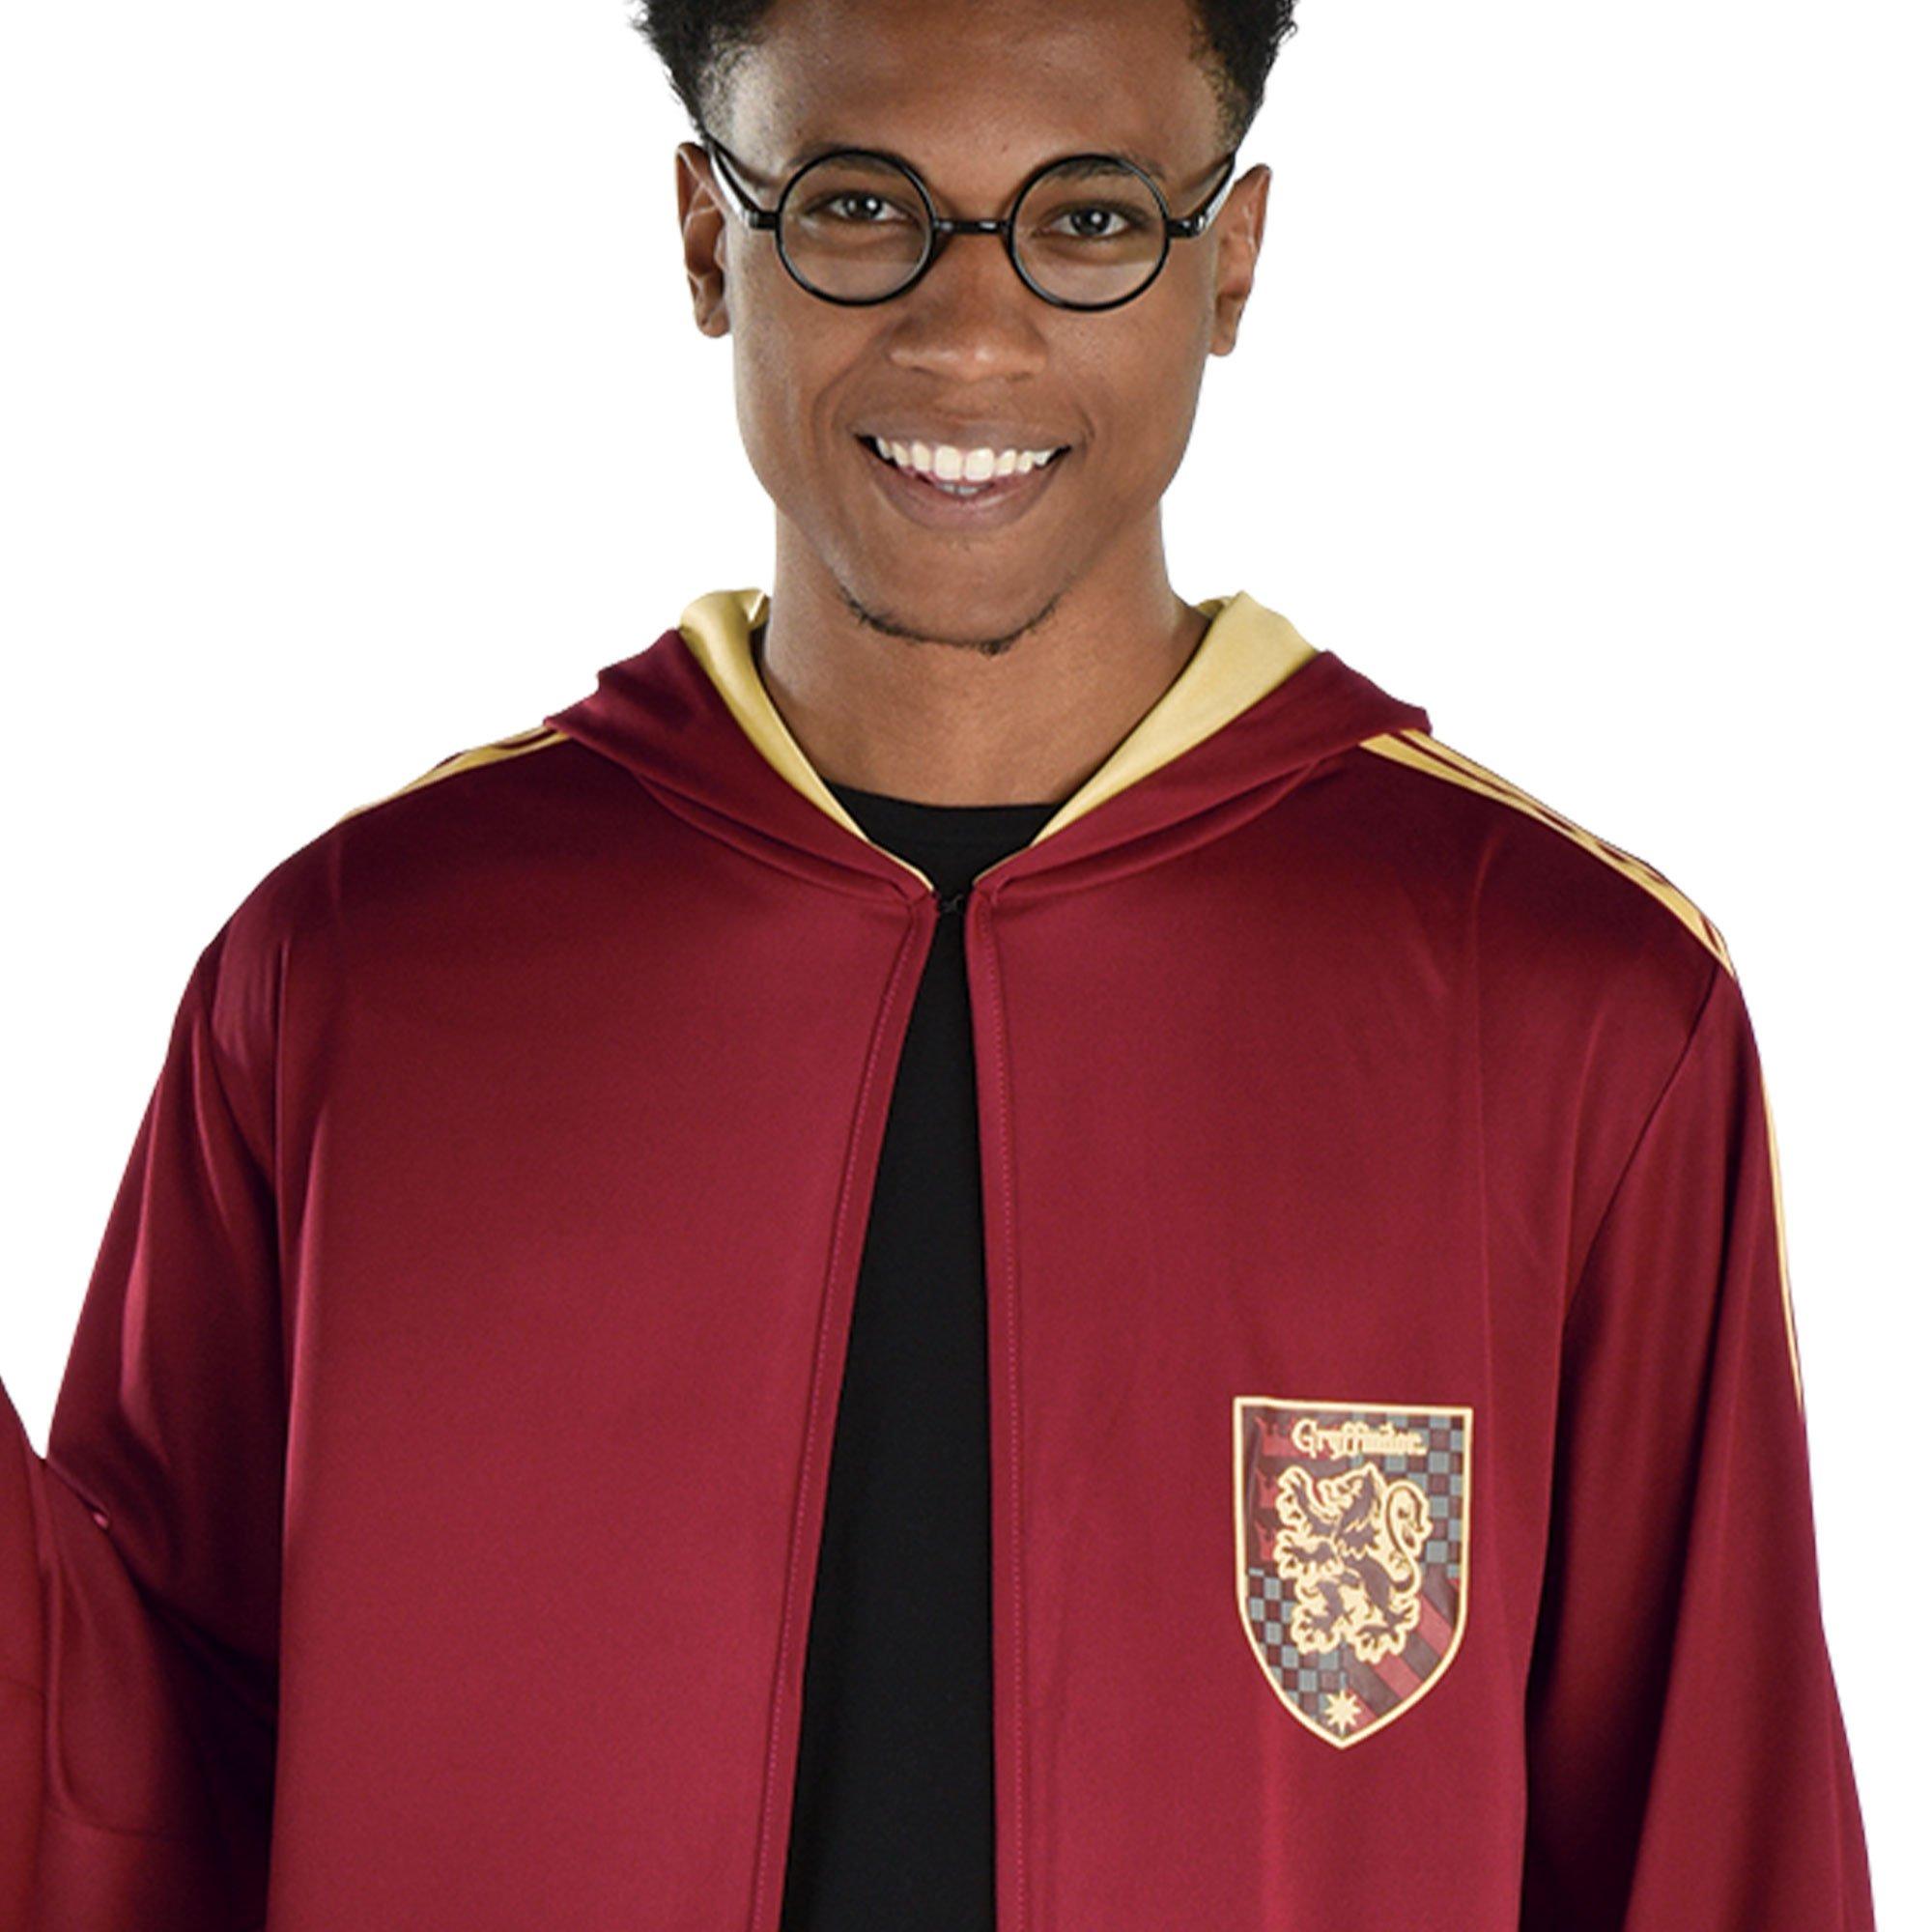 Adult Gryffindor Quidditch Robe - Harry Potter | Party City